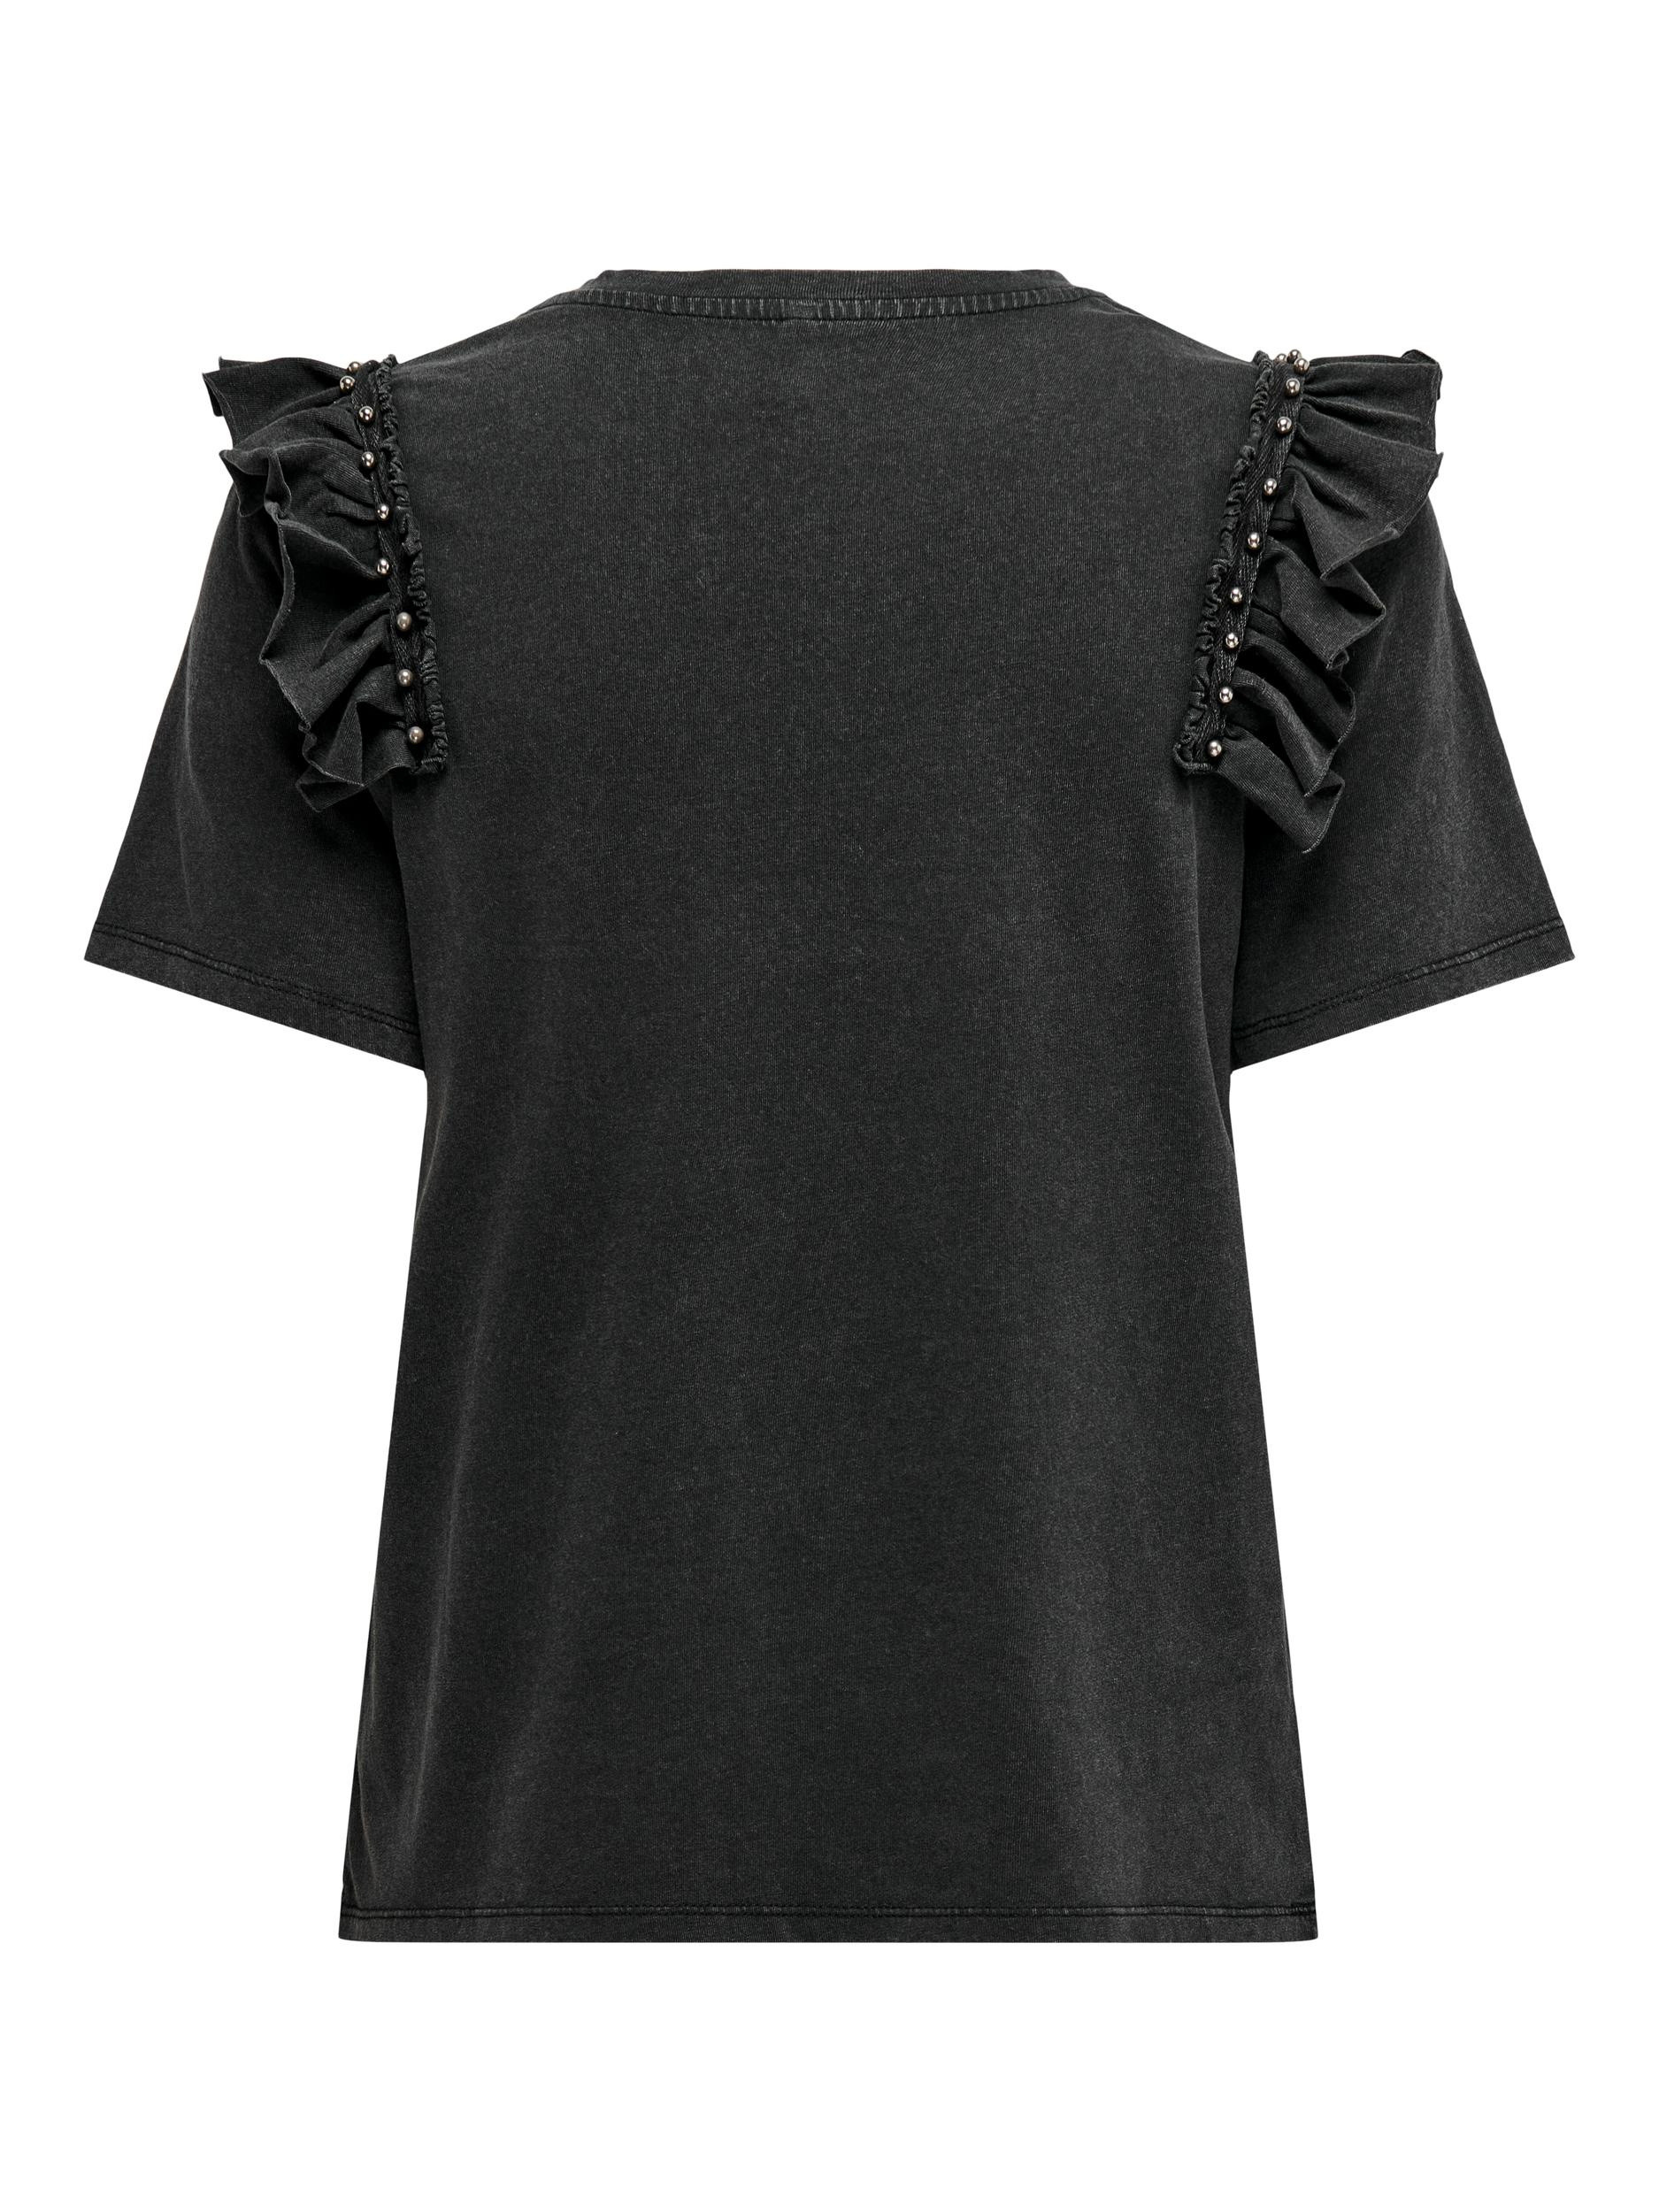 Only - Regular fit cotton T-shirt with ruffles, Black, large image number 1